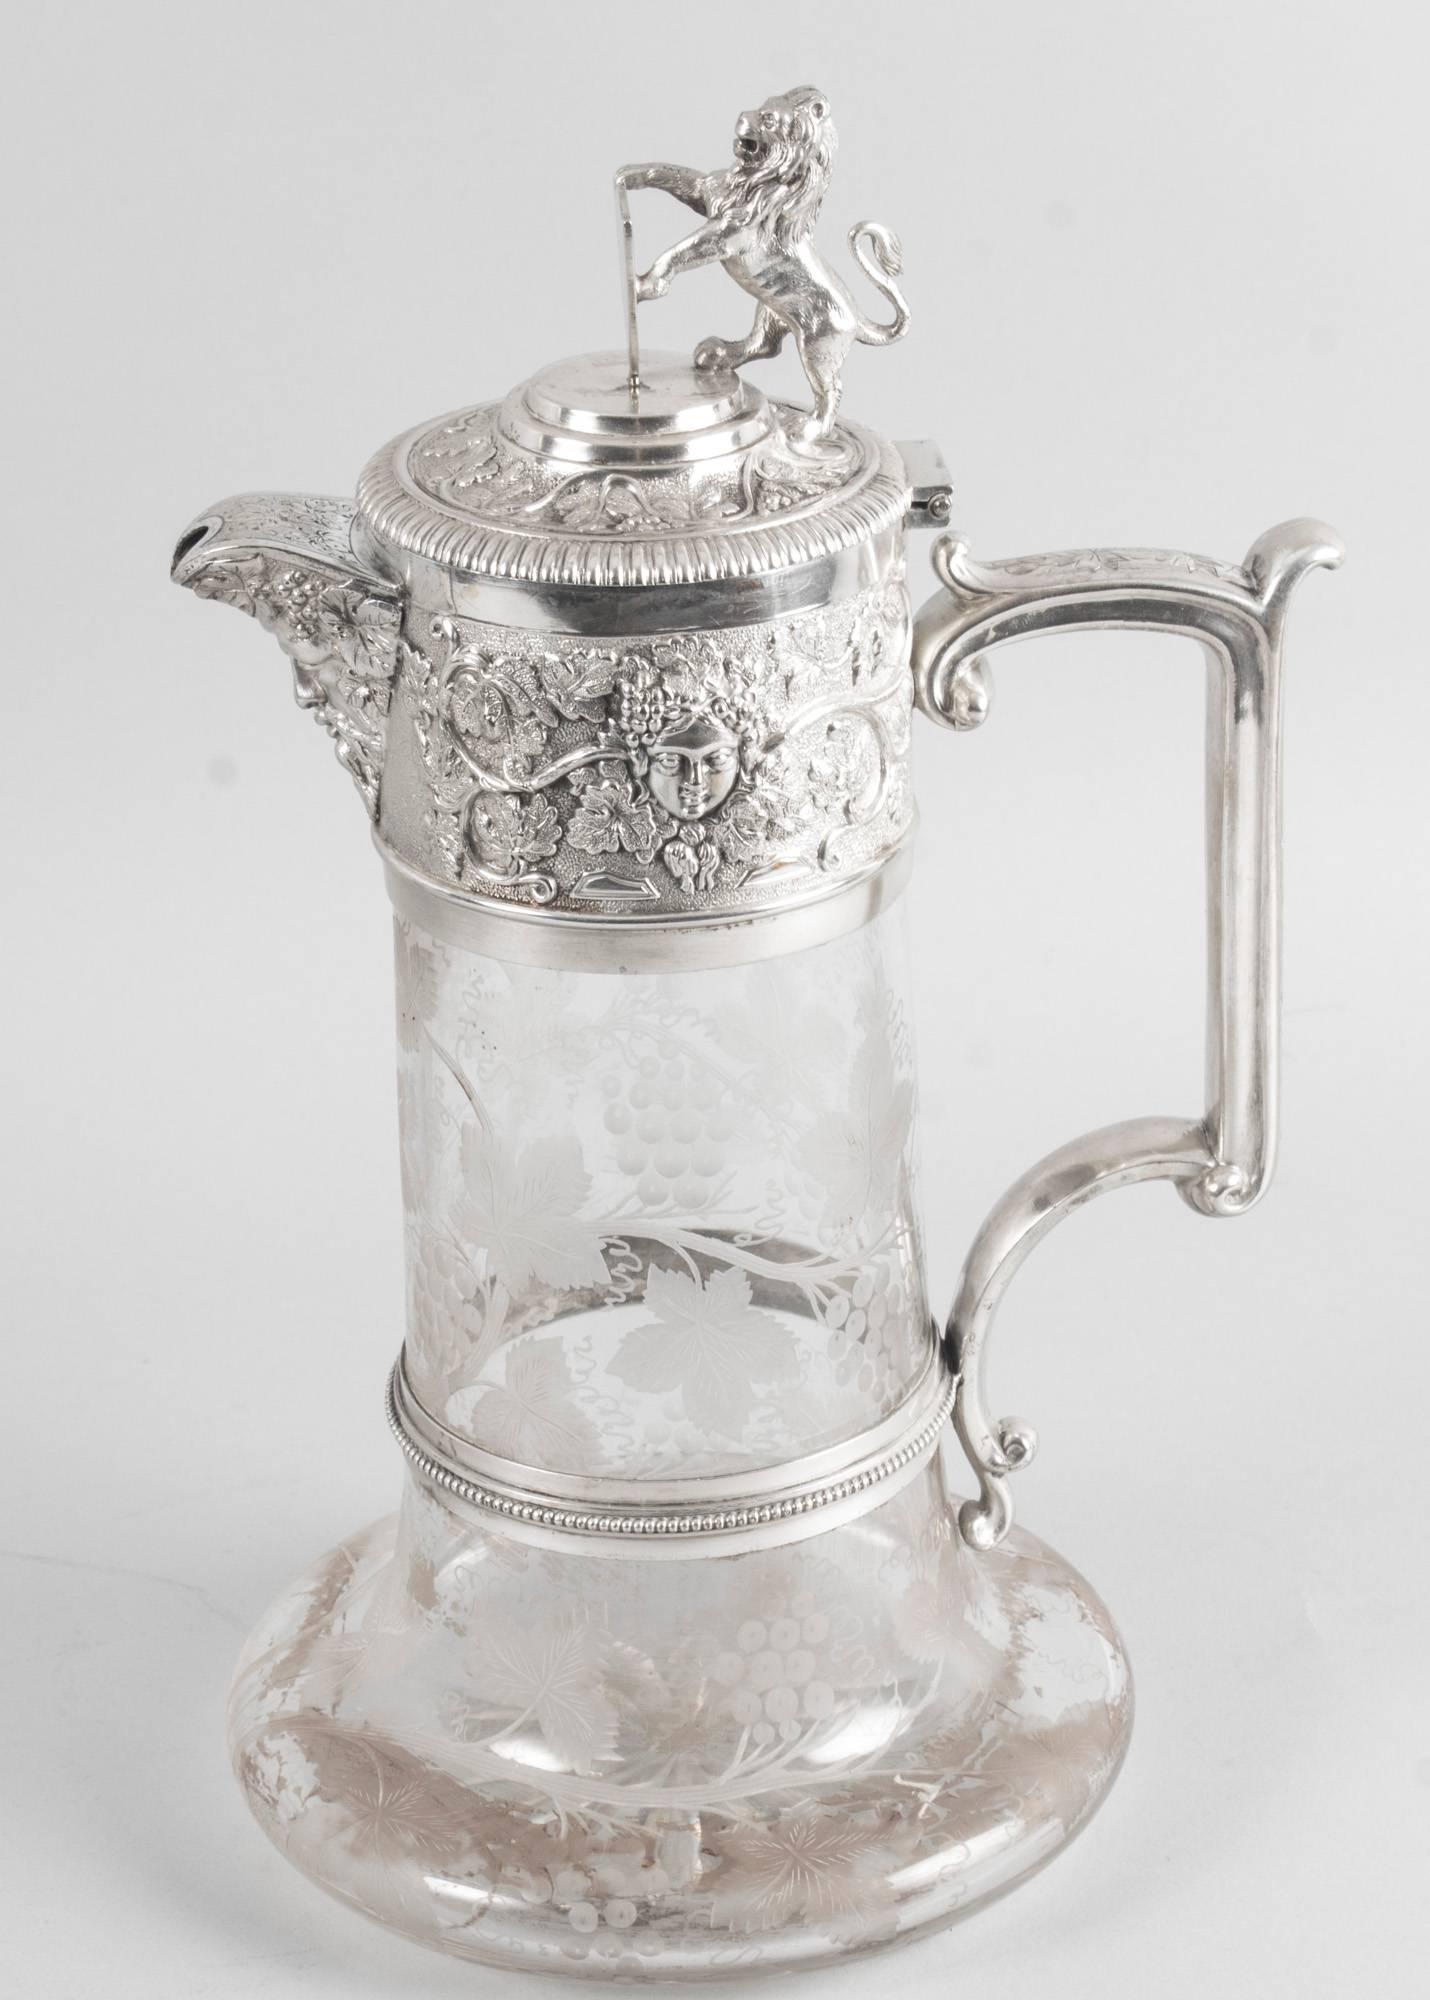 This is a superb English Victorian silver plate and cut crystal claret jug bearing the makers mark of the renowned silversmith Elkington, circa 1870 in date.

The jug features hand etched crystal featuring vines, grapes and leaves, and the silver